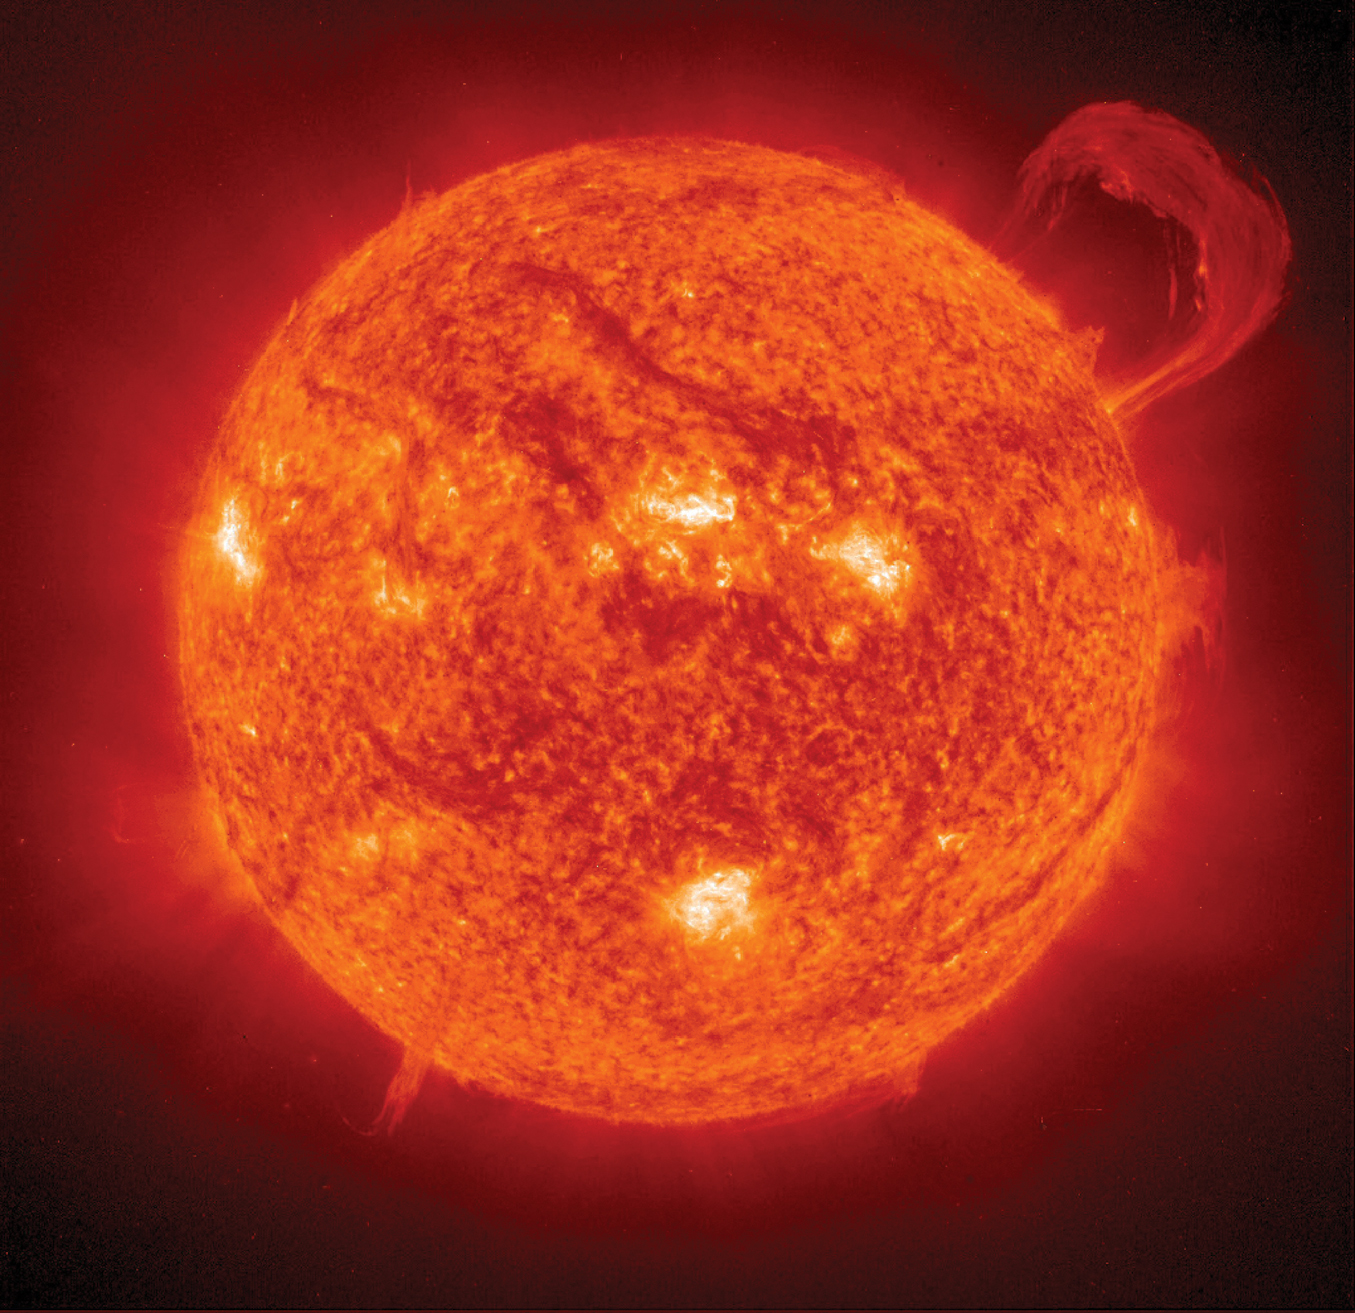 The illustration shows an image of the sun with solar flares coming out of it.  